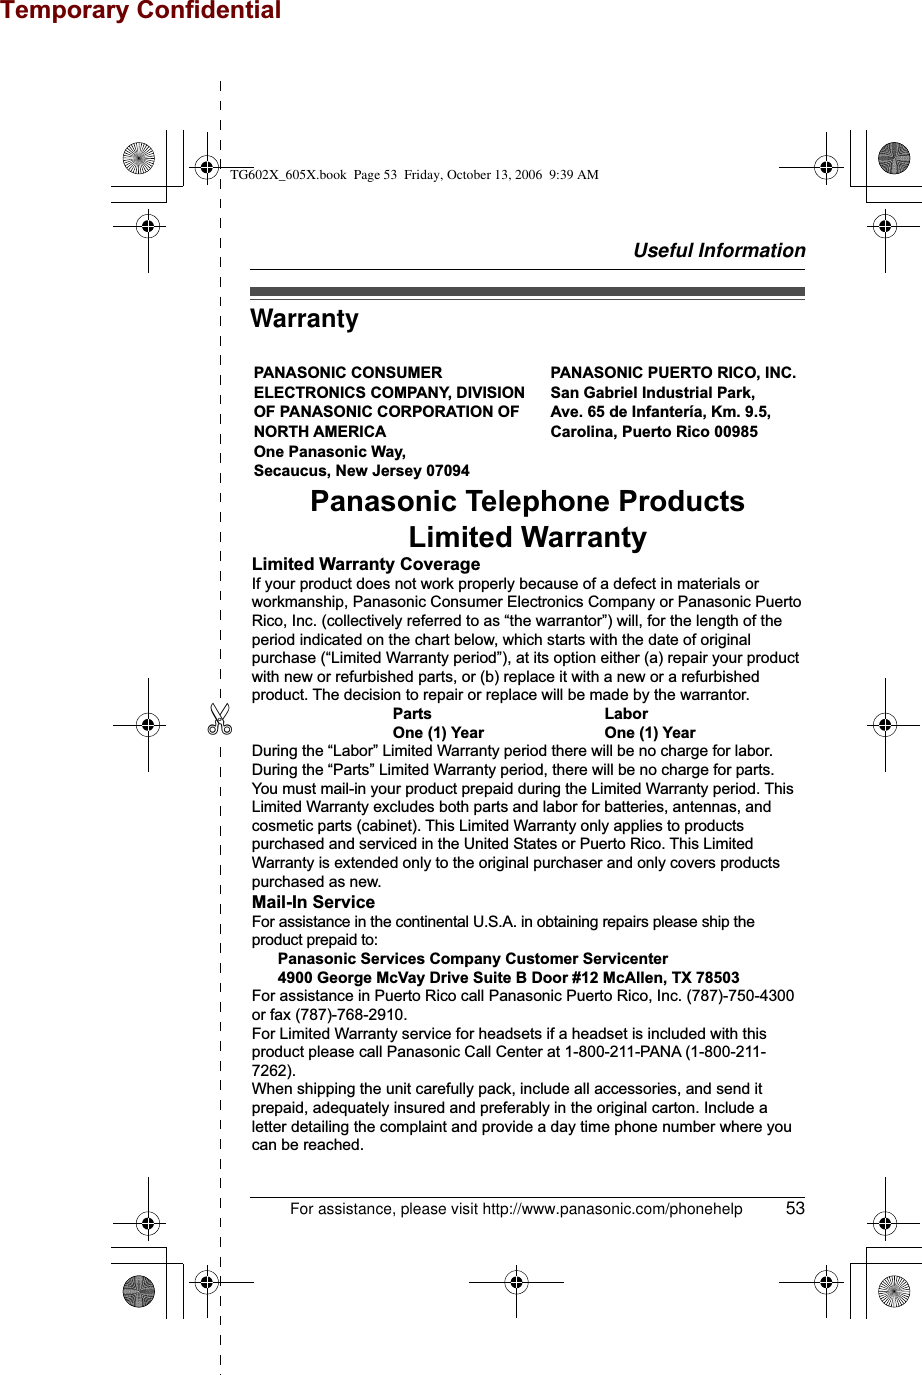 Useful InformationFor assistance, please visit http://www.panasonic.com/phonehelp 53✄WarrantyPANASONIC CONSUMER ELECTRONICS COMPANY, DIVISION OF PANASONIC CORPORATION OF NORTH AMERICA One Panasonic Way, Secaucus, New Jersey 07094PANASONIC PUERTO RICO, INC.San Gabriel Industrial Park, Ave. 65 de Infantería, Km. 9.5,Carolina, Puerto Rico 00985Panasonic Telephone ProductsLimited WarrantyLimited Warranty CoverageIf your product does not work properly because of a defect in materials or workmanship, Panasonic Consumer Electronics Company or Panasonic Puerto Rico, Inc. (collectively referred to as “the warrantor”) will, for the length of the period indicated on the chart below, which starts with the date of original purchase (“Limited Warranty period”), at its option either (a) repair your product with new or refurbished parts, or (b) replace it with a new or a refurbished product. The decision to repair or replace will be made by the warrantor.     Parts       Labor     One (1) Year    One (1) YearDuring the “Labor” Limited Warranty period there will be no charge for labor. During the “Parts” Limited Warranty period, there will be no charge for parts. You must mail-in your product prepaid during the Limited Warranty period. This Limited Warranty excludes both parts and labor for batteries, antennas, and cosmetic parts (cabinet). This Limited Warranty only applies to products purchased and serviced in the United States or Puerto Rico. This Limited Warranty is extended only to the original purchaser and only covers products purchased as new.Mail-In ServiceFor assistance in the continental U.S.A. in obtaining repairs please ship the product prepaid to:  Panasonic Services Company Customer Servicenter  4900 George McVay Drive Suite B Door #12 McAllen, TX 78503For assistance in Puerto Rico call Panasonic Puerto Rico, Inc. (787)-750-4300 or fax (787)-768-2910.For Limited Warranty service for headsets if a headset is included with this product please call Panasonic Call Center at 1-800-211-PANA (1-800-211-7262).When shipping the unit carefully pack, include all accessories, and send it prepaid, adequately insured and preferably in the original carton. Include a letter detailing the complaint and provide a day time phone number where you can be reached.TG602X_605X.book  Page 53  Friday, October 13, 2006  9:39 AMTemporary Confidential